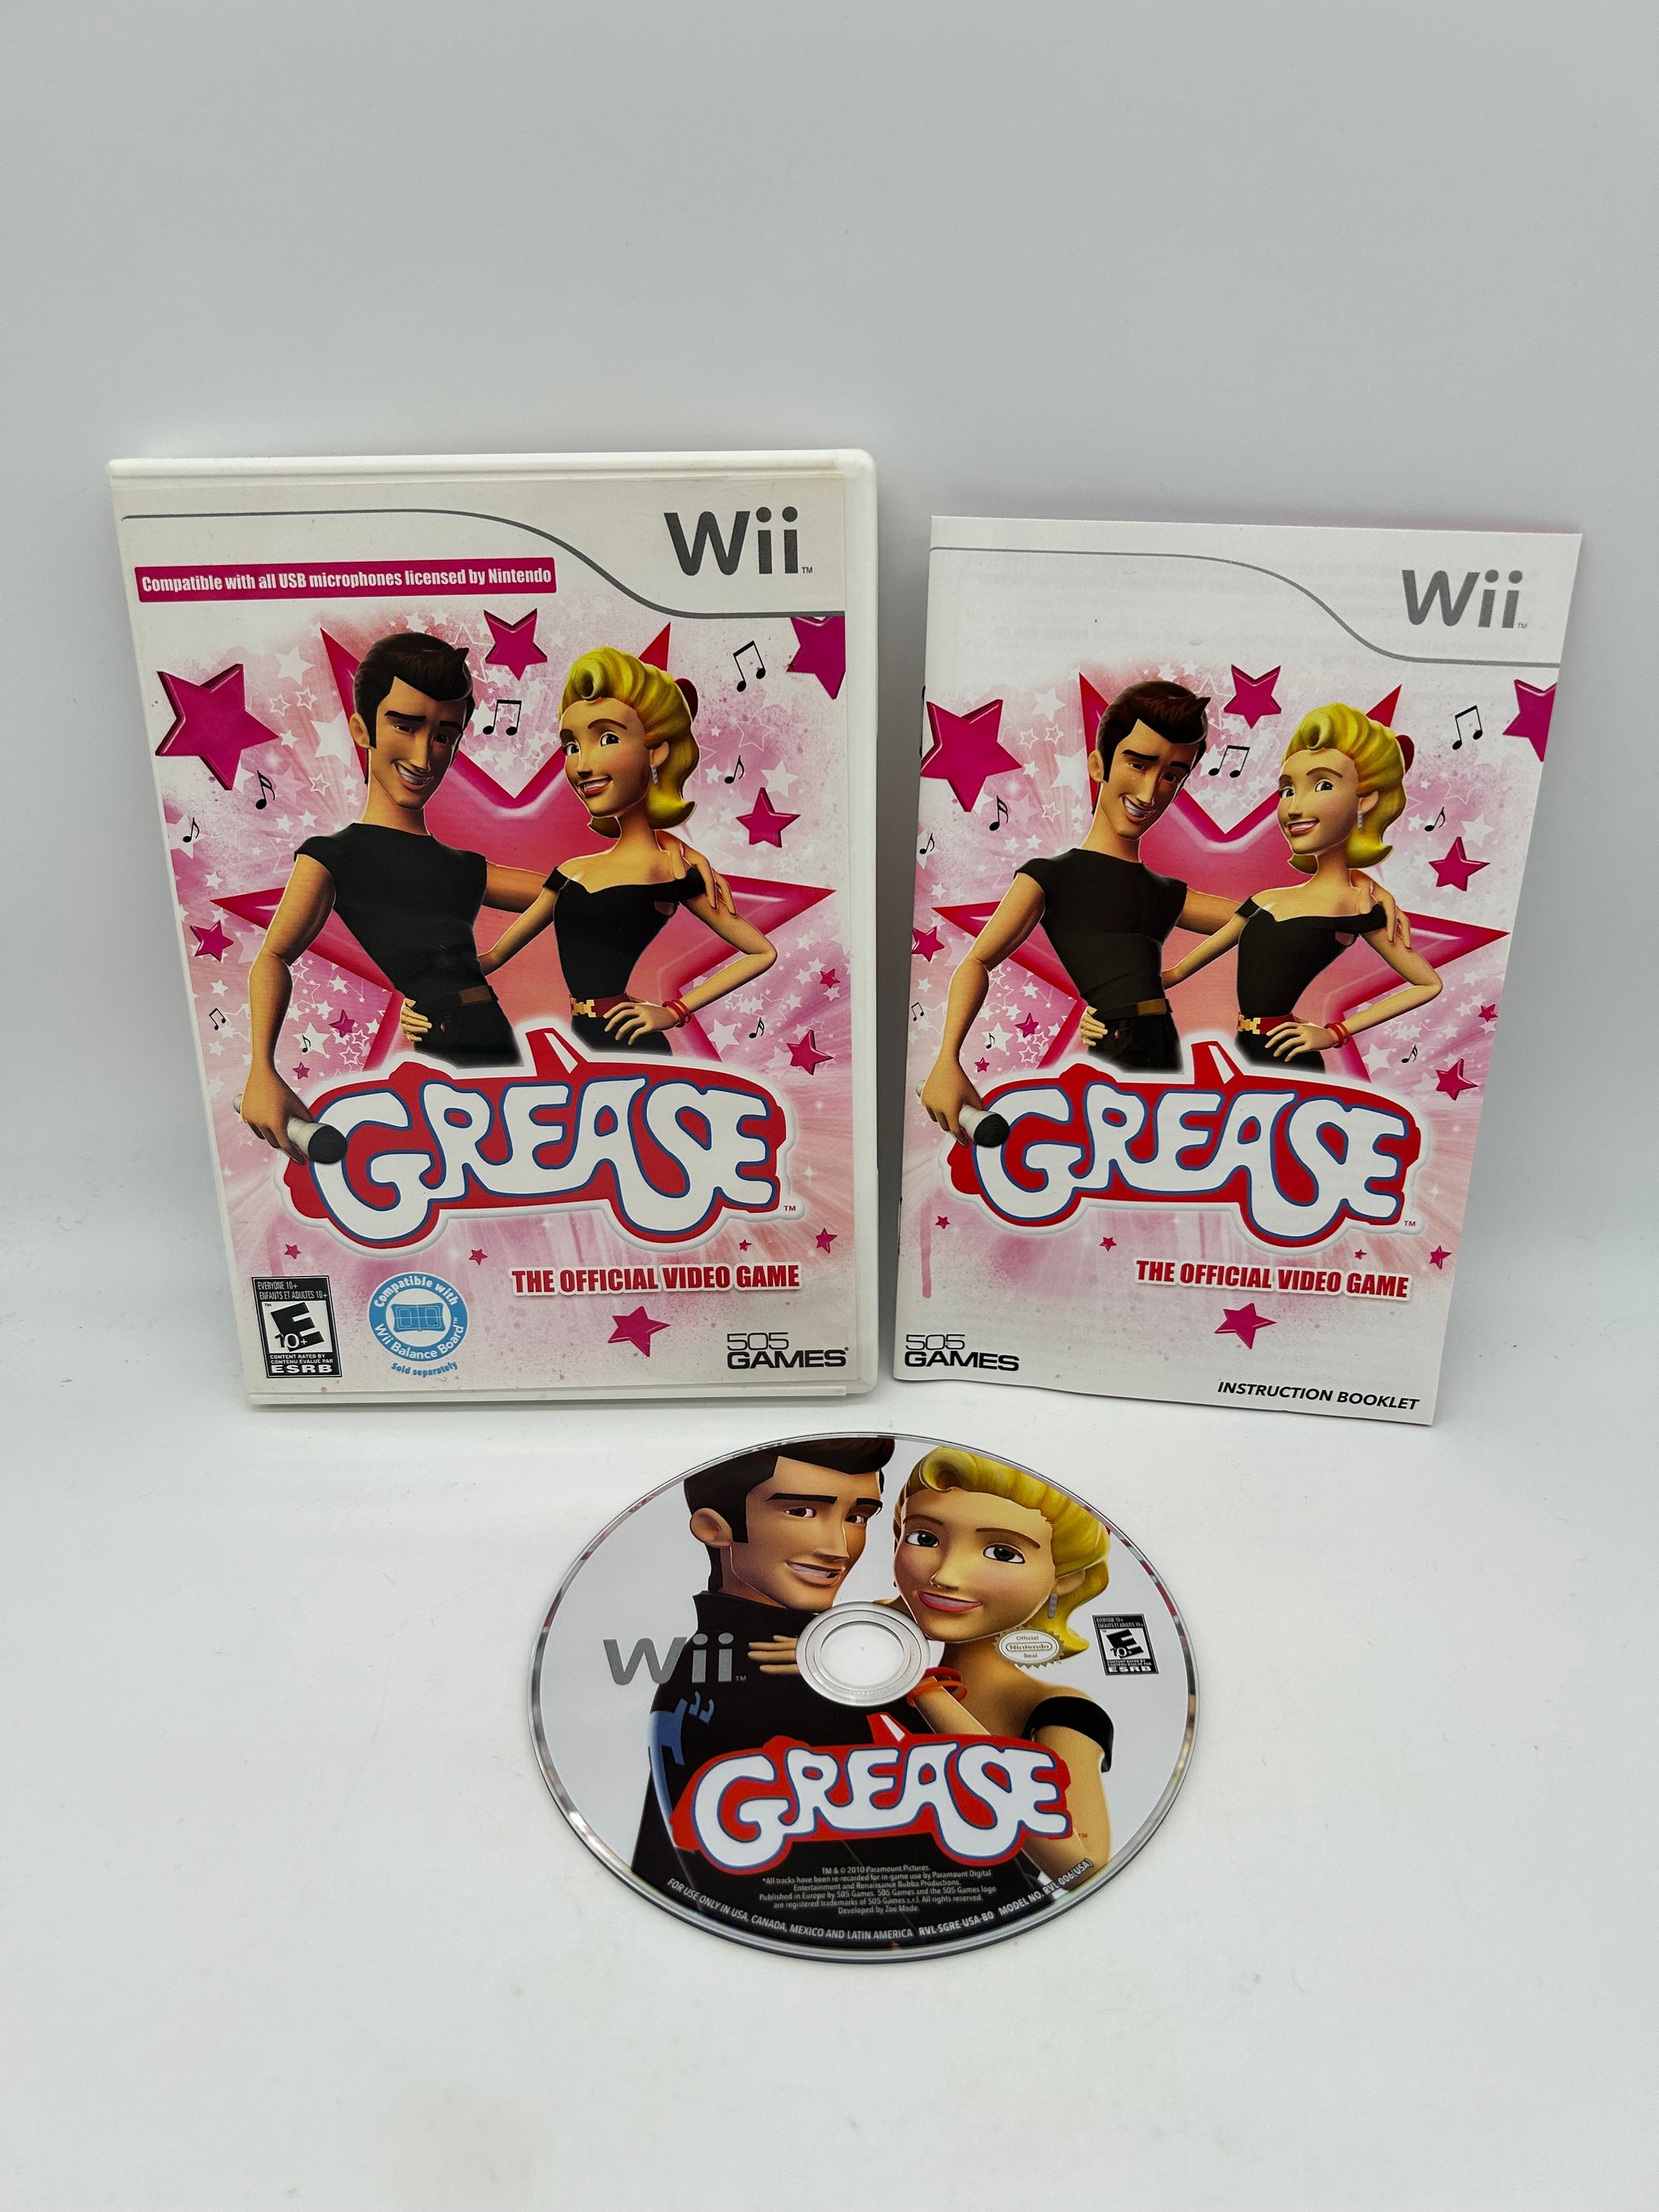 PiXEL-RETRO.COM : NINTENDO WII COMPLET CIB BOX MANUAL GAME NTSC GREASE THE OFFICIAL VIDEO GAME